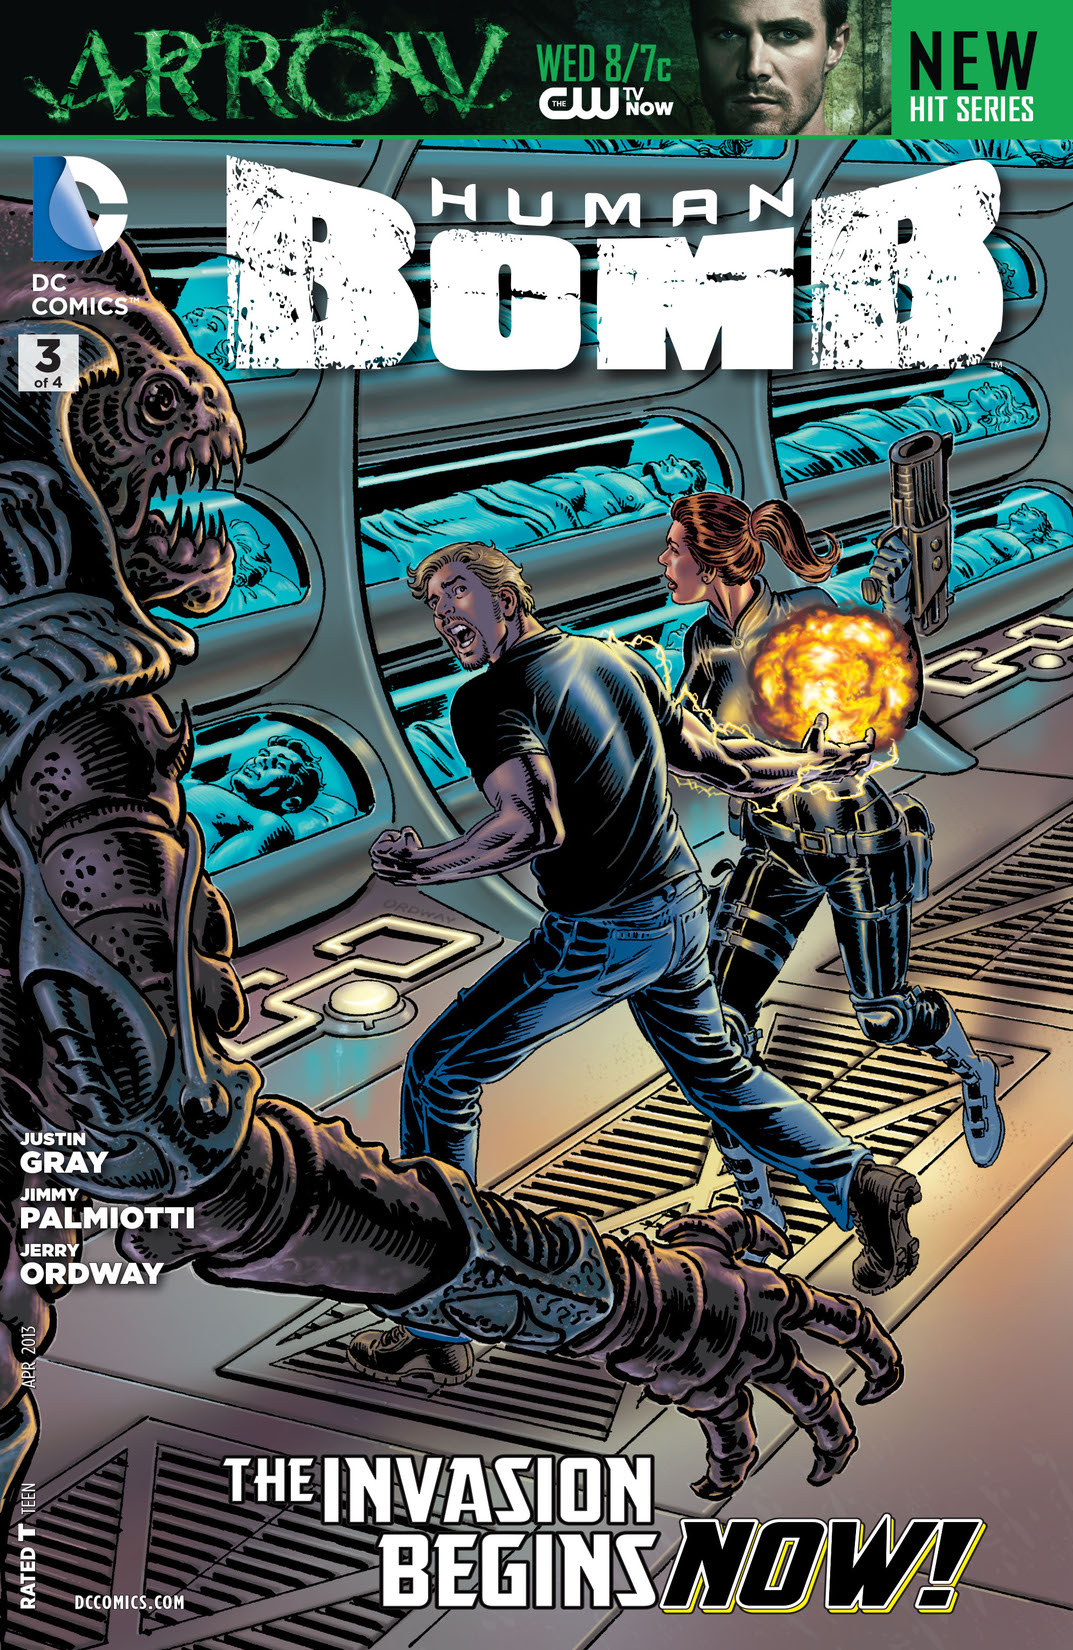 Human Bomb #3 preview images